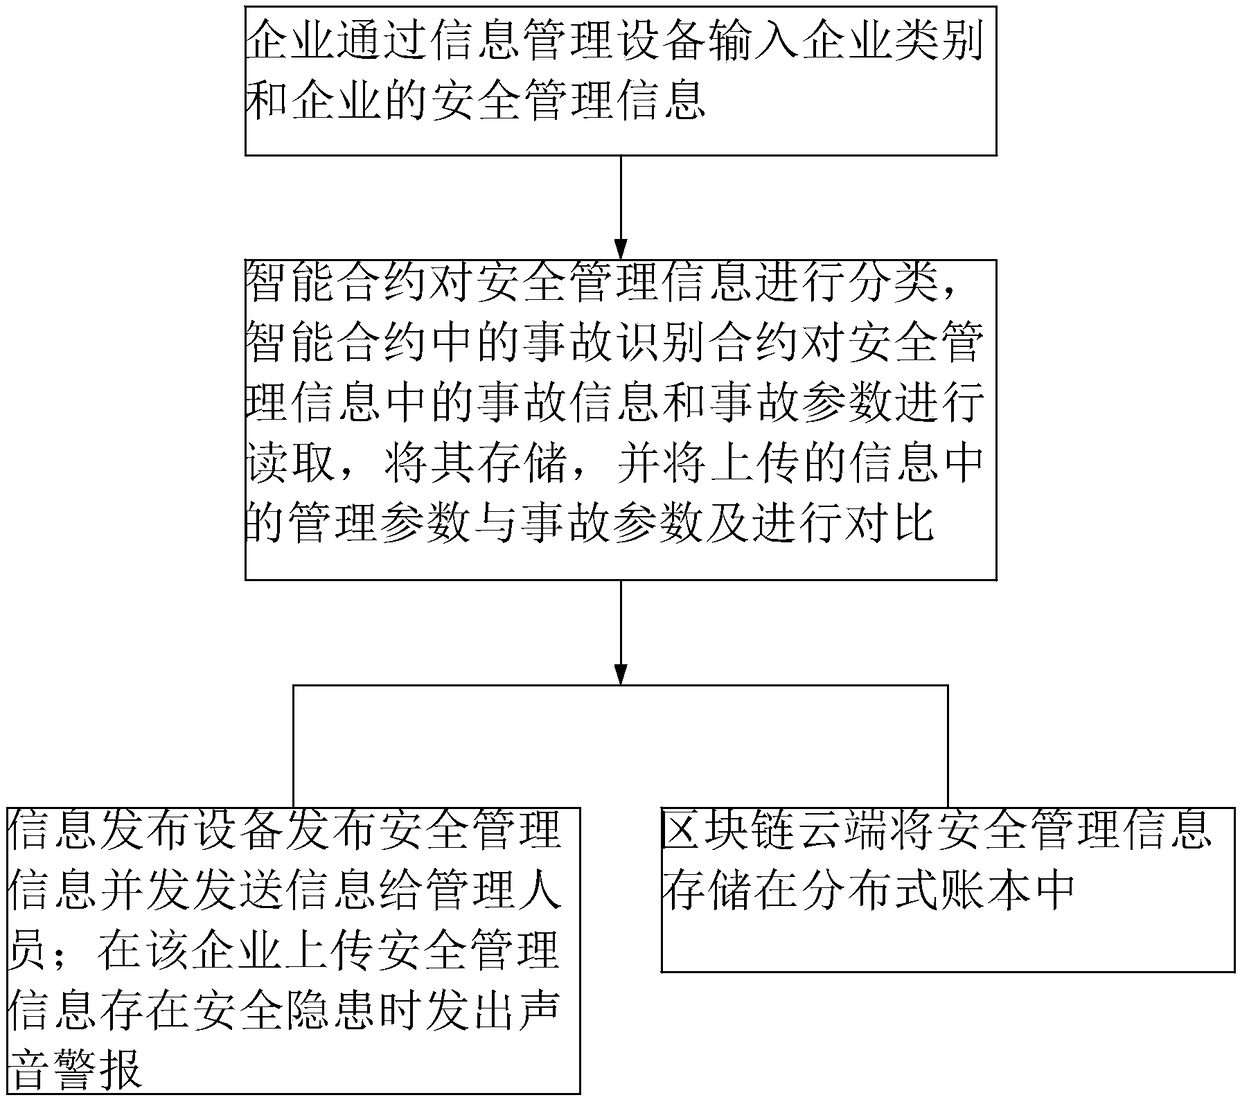 Safety production information sharing method based on block chain technology